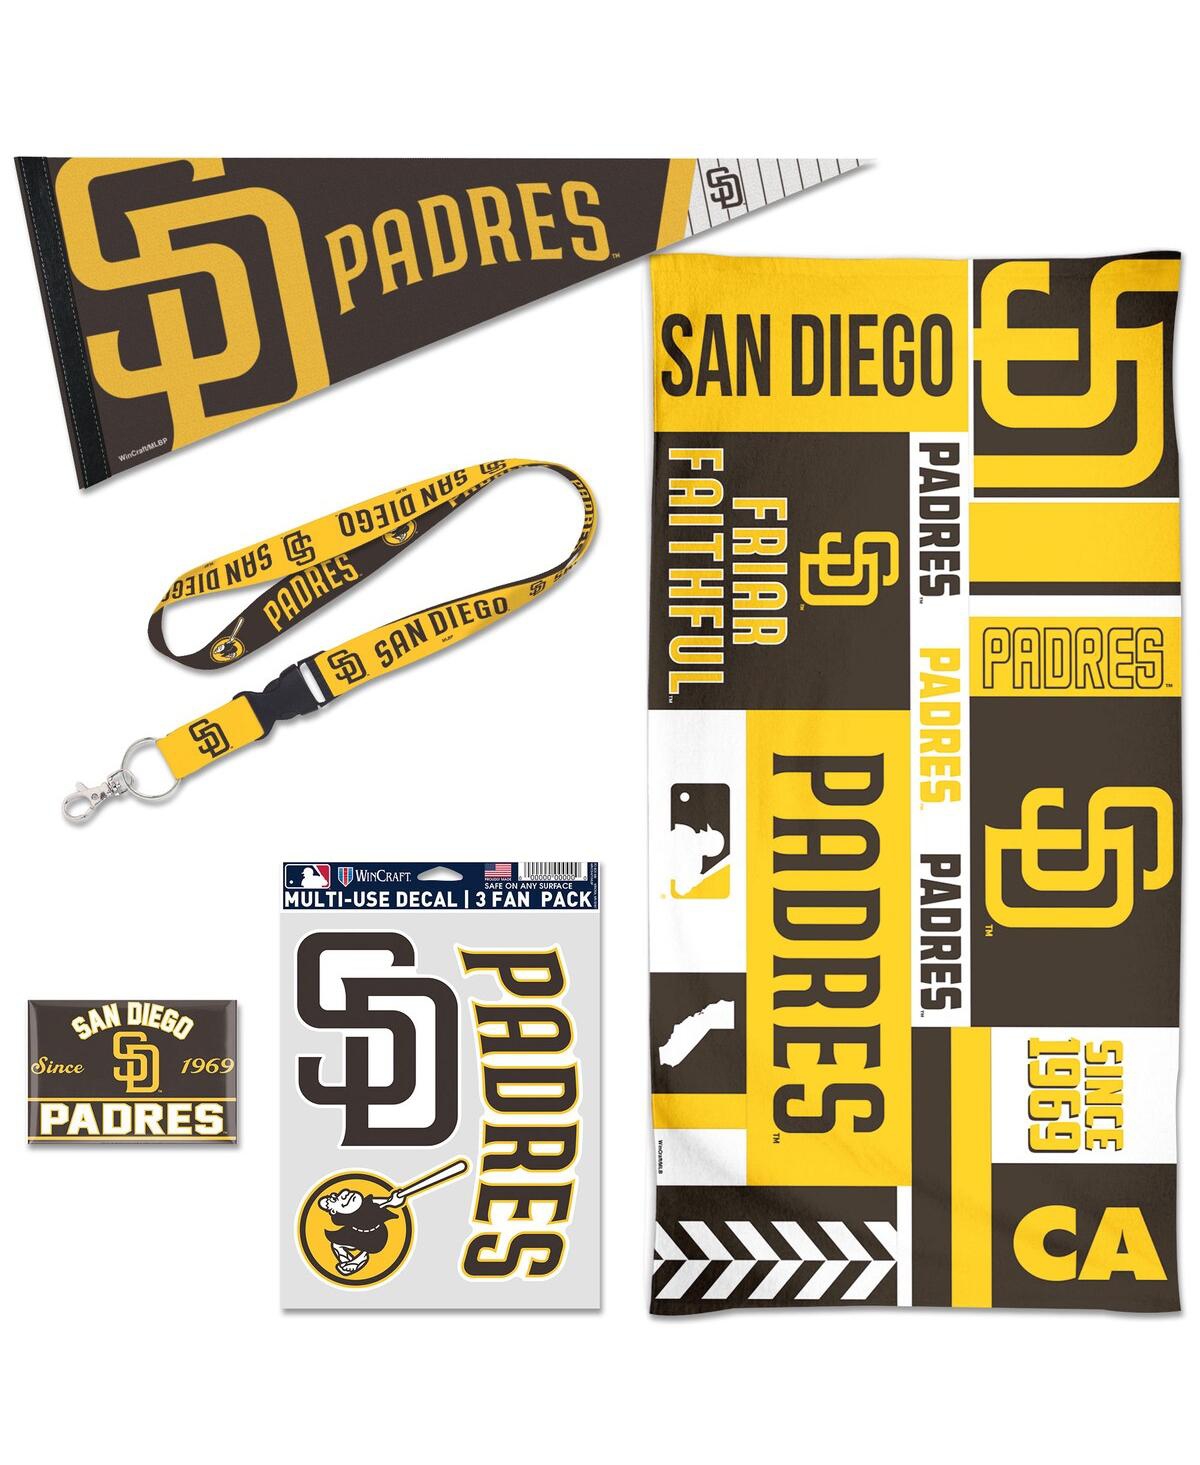 San Diego Padres House Fan Accessories Pack - Multi